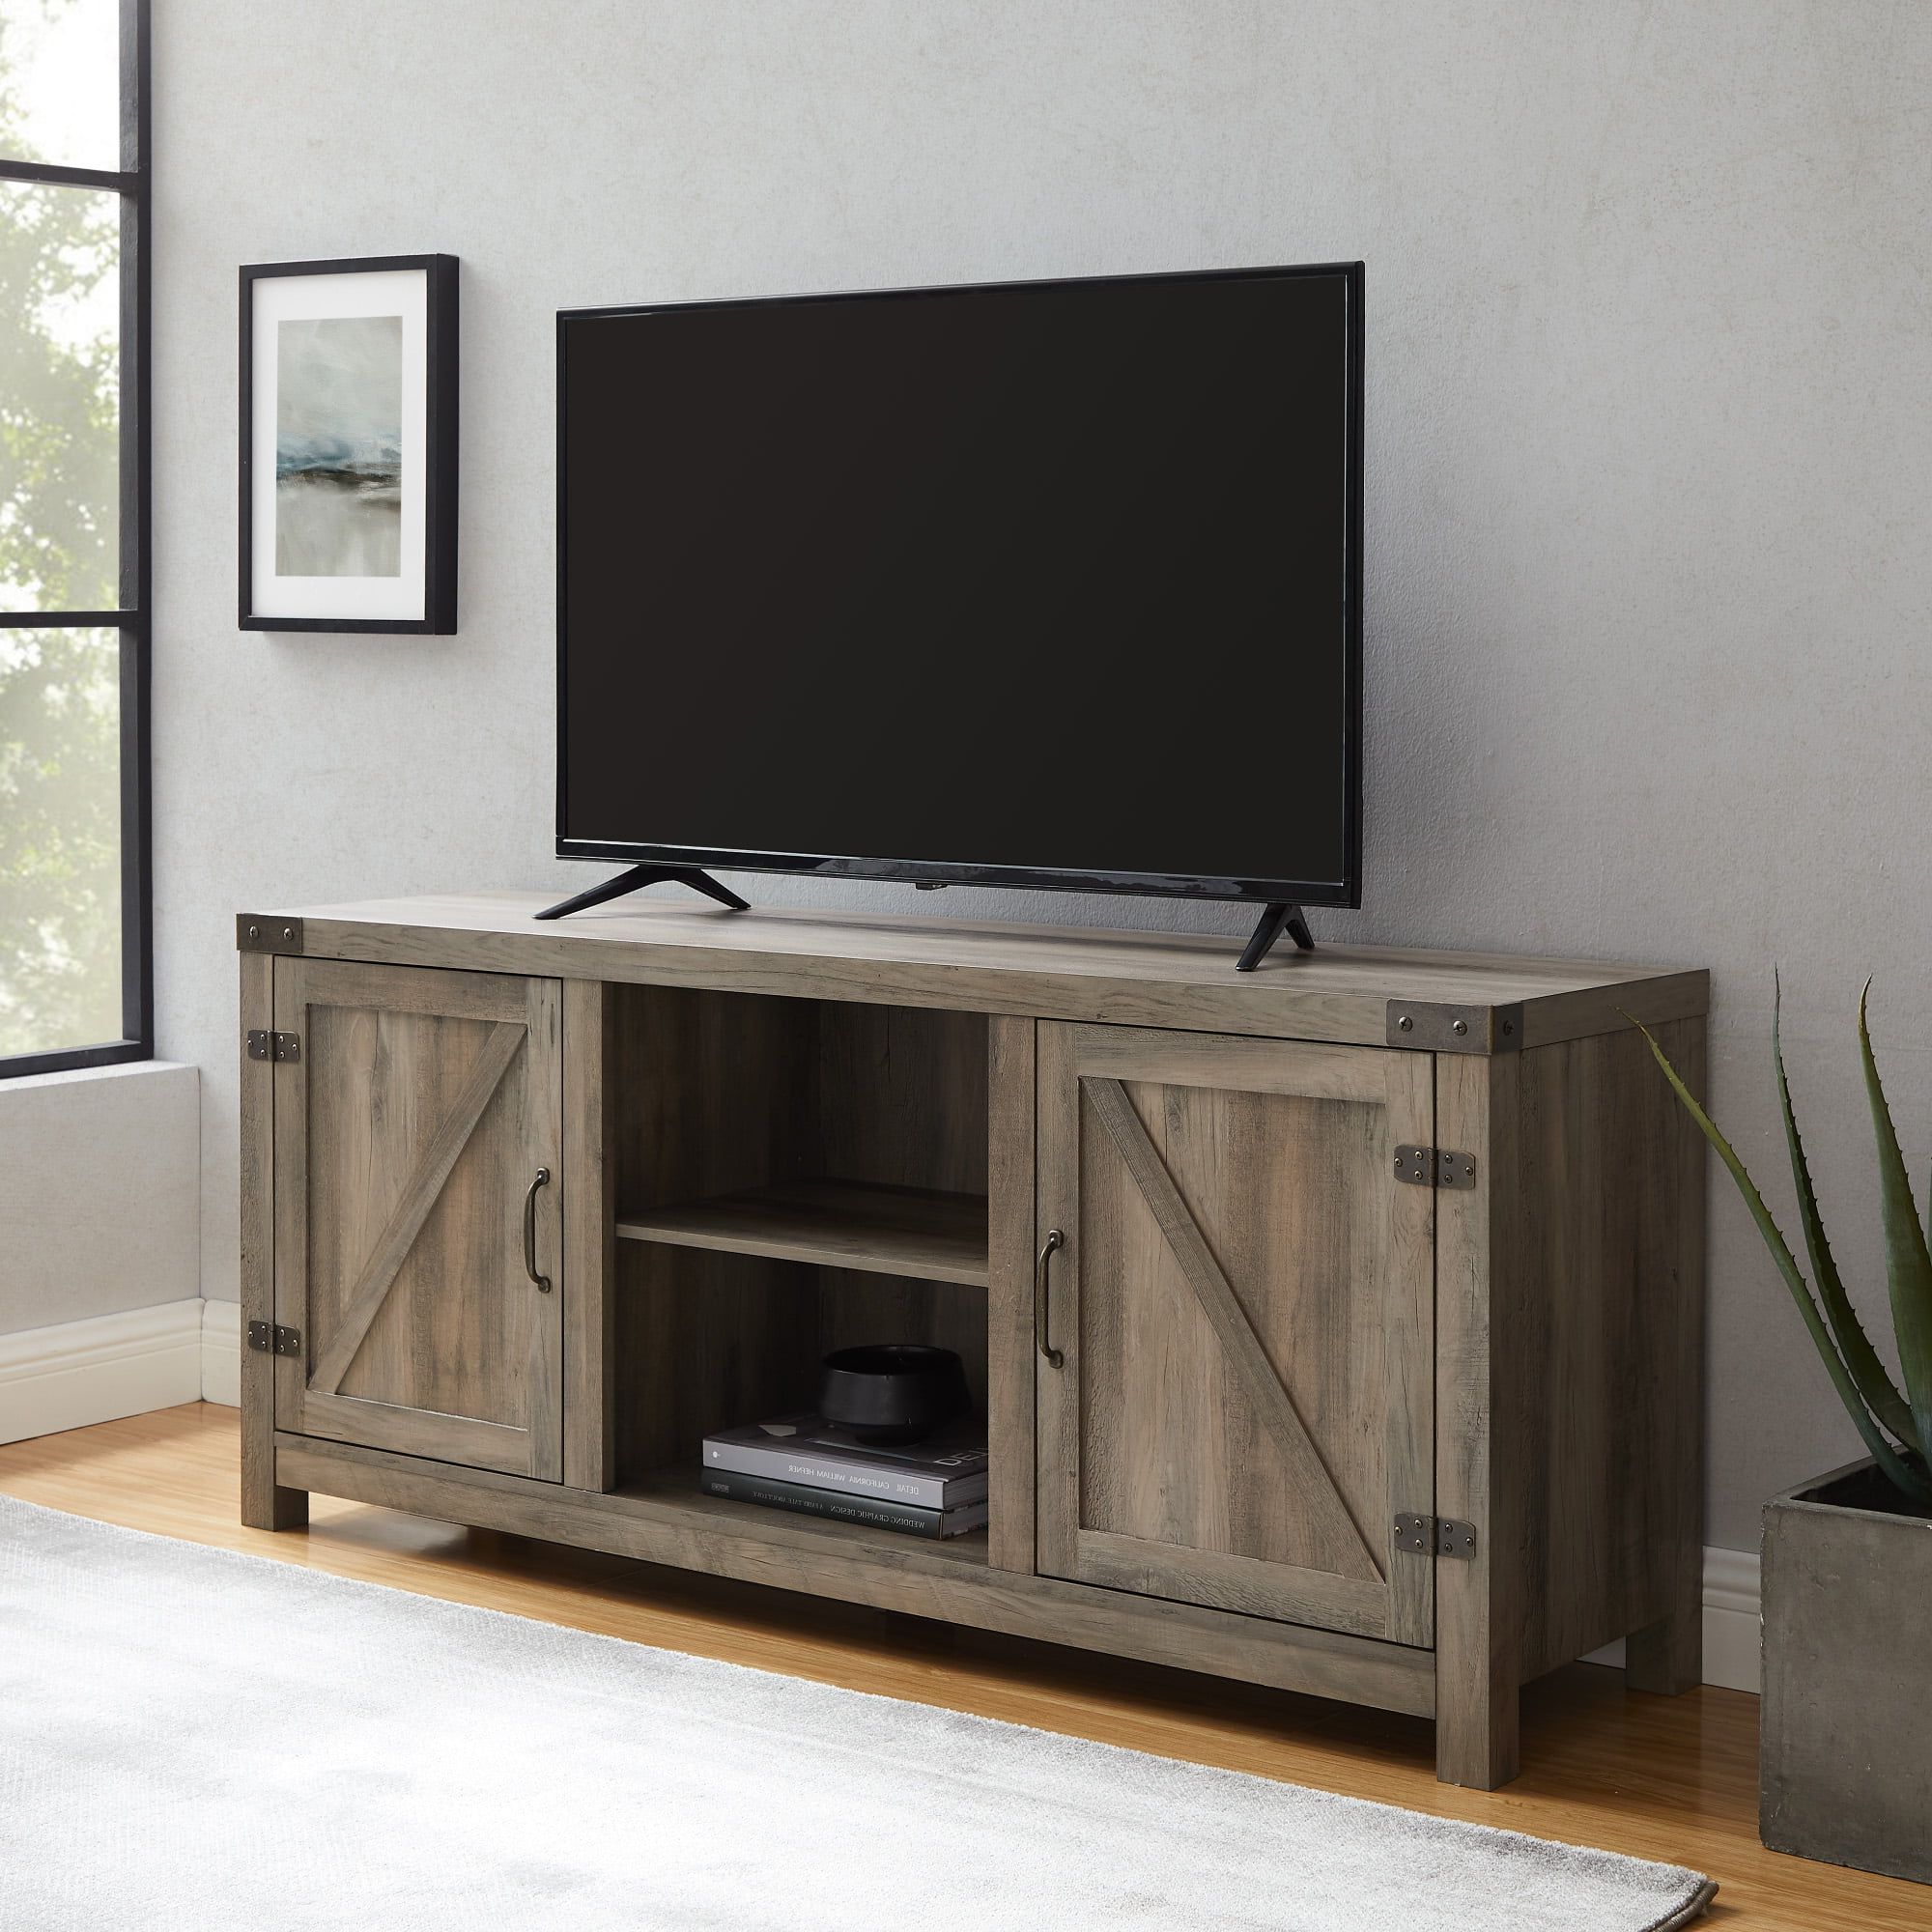 Most Recent Modern Farmhouse Barn Tv Stands Within Tv Stands 65 Inch : Woven Paths Modern Farmhouse Barn Door Tv Stand For (View 10 of 15)